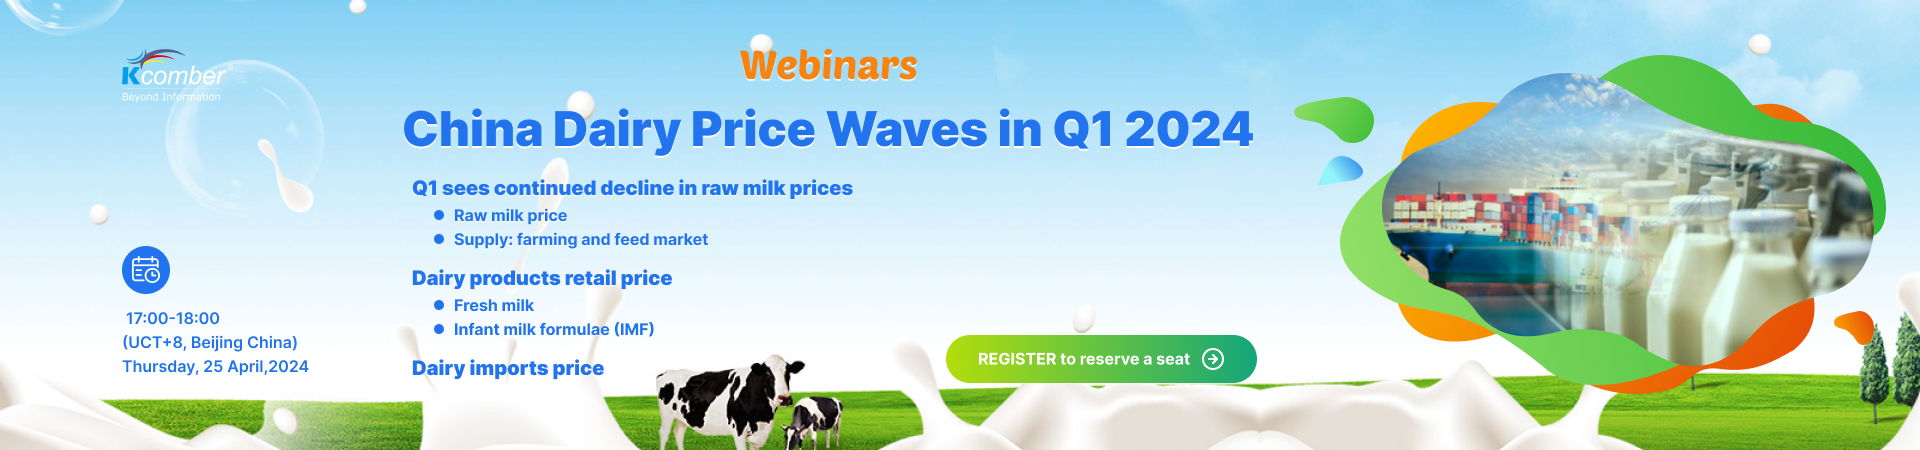 China’s Dairy Price Waves in Q1 2024